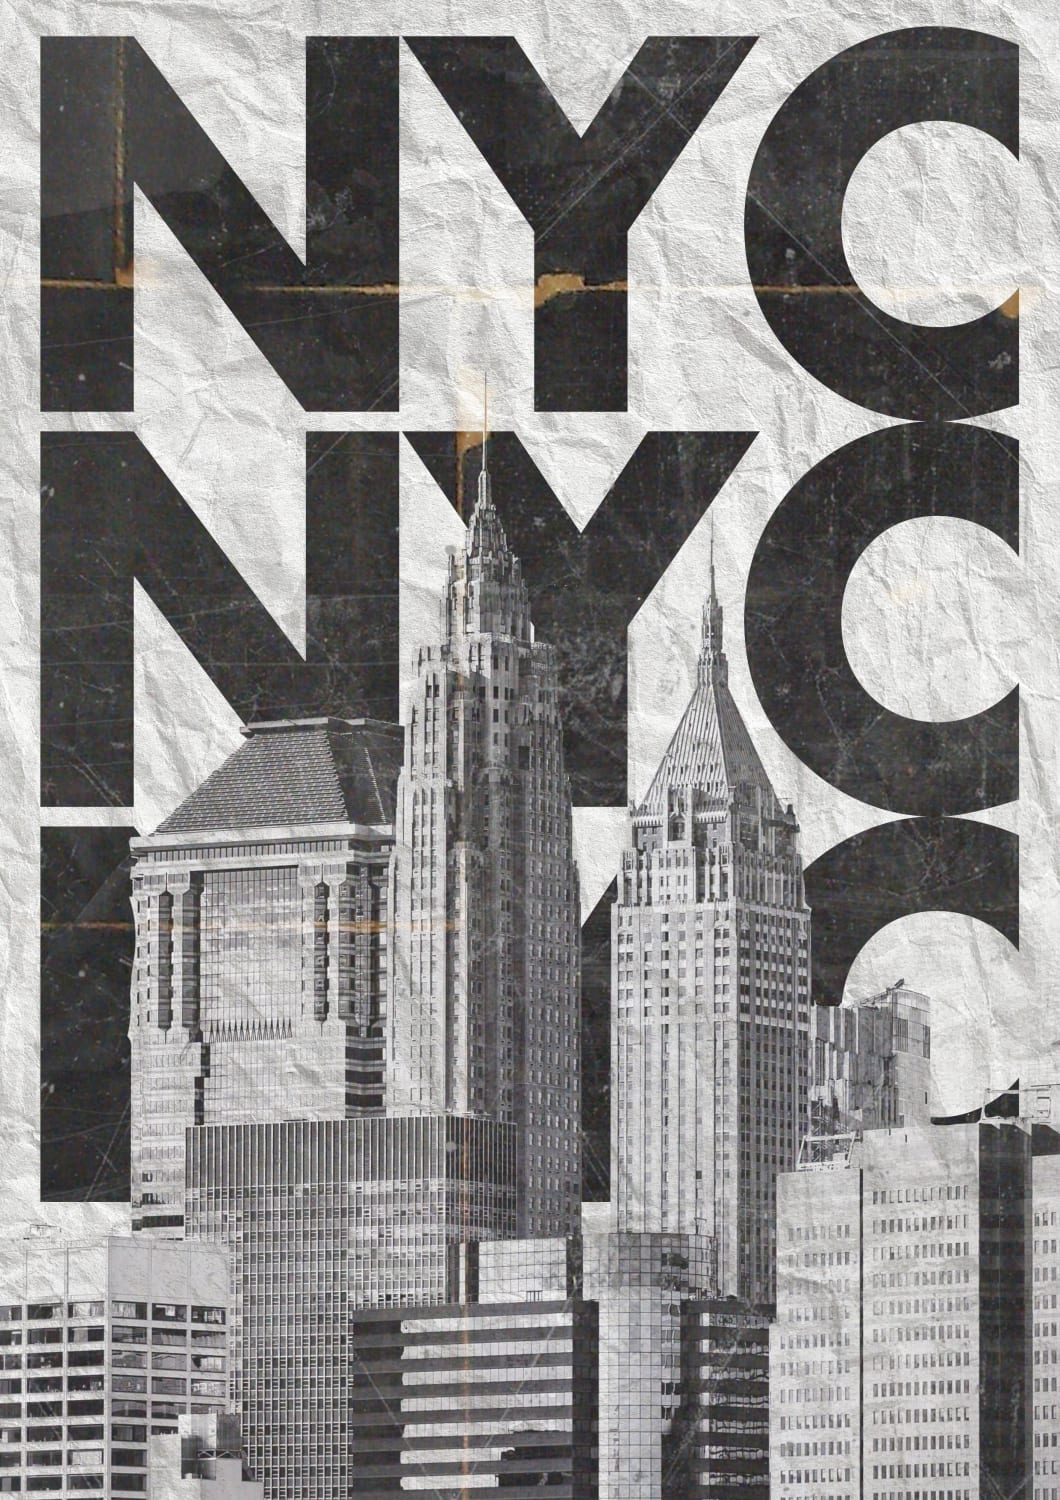 NYC artwork i made. I really like typography so this is my first attempt. Please give your feedback!